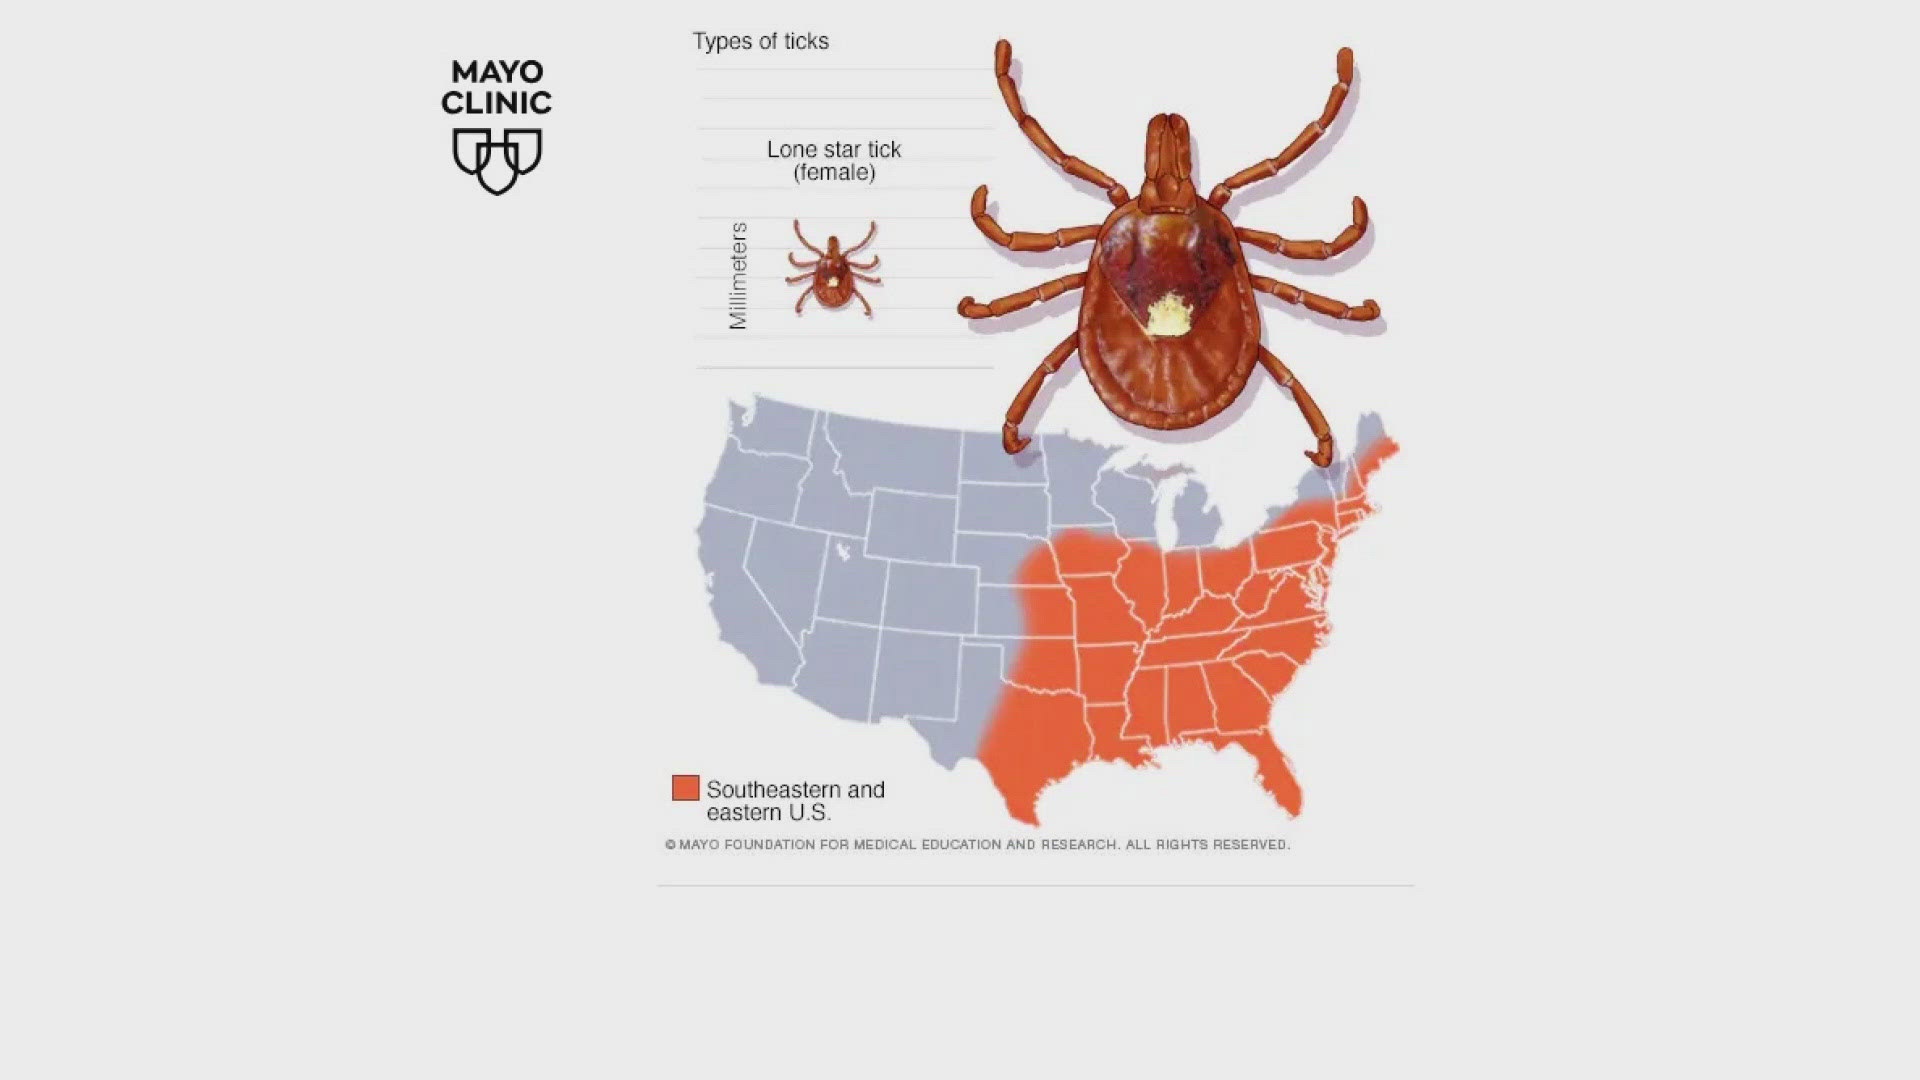 Lone star ticks can be found in almost half of the country.